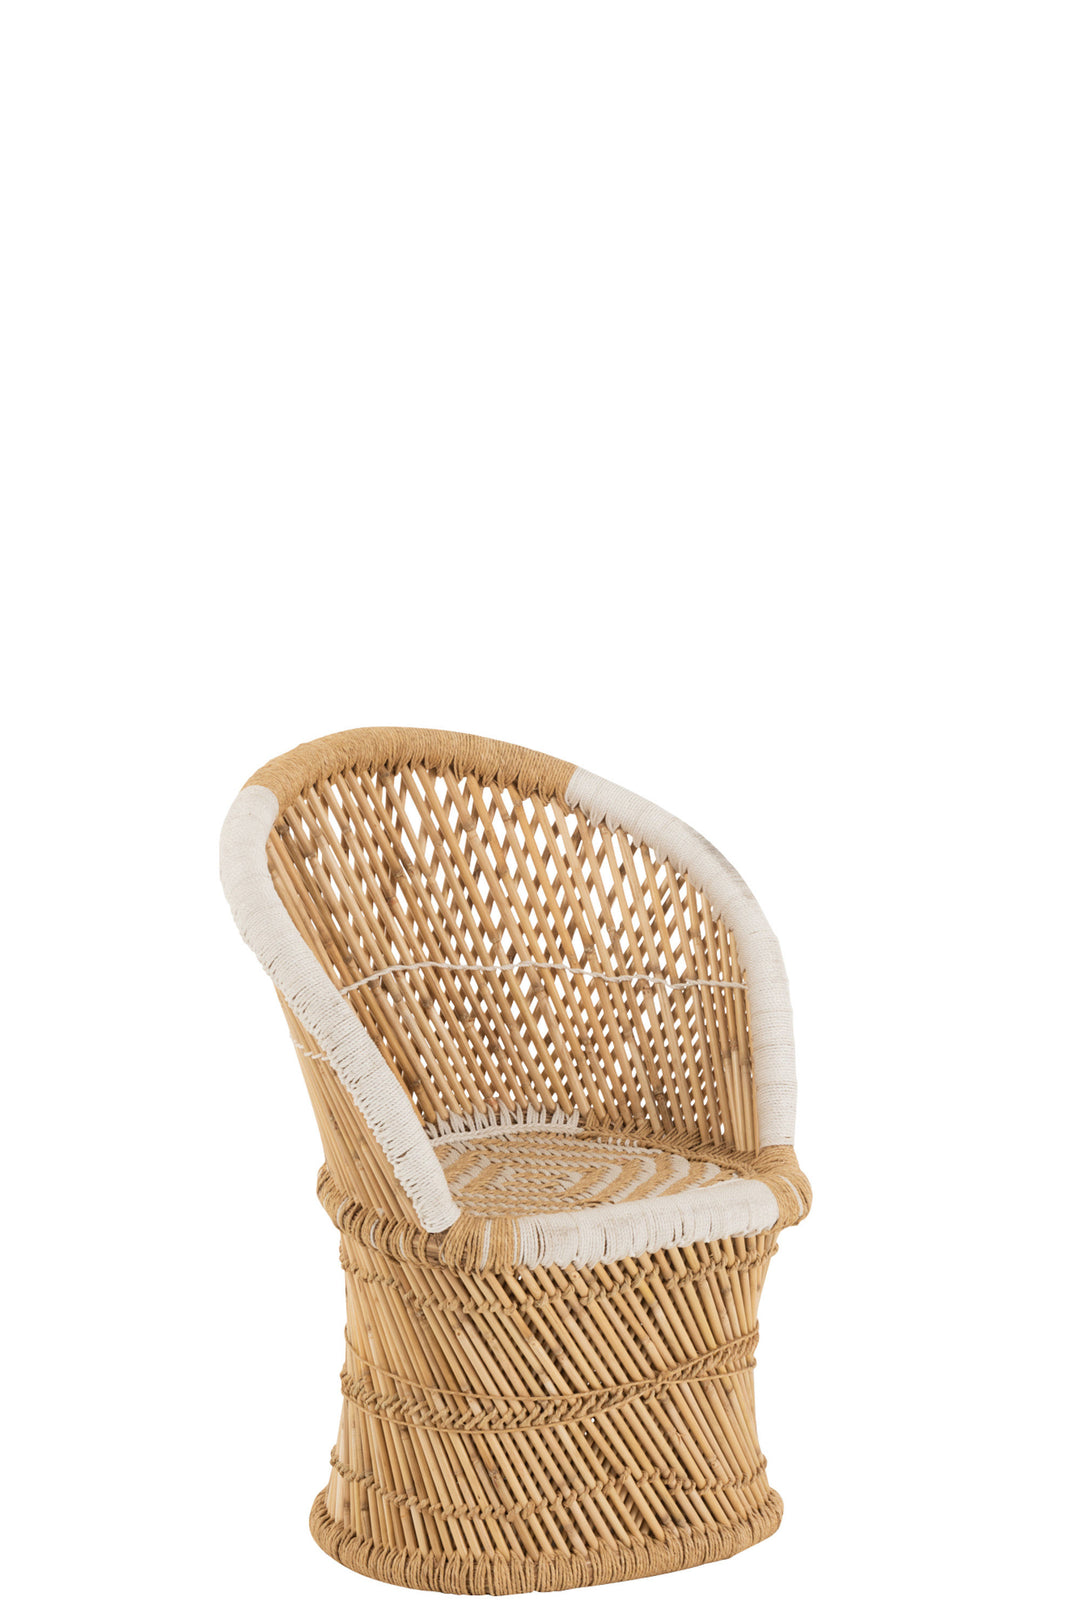 J-Line by Jolipa CHAIR BACK BAMBOO NAT/WH CHILD